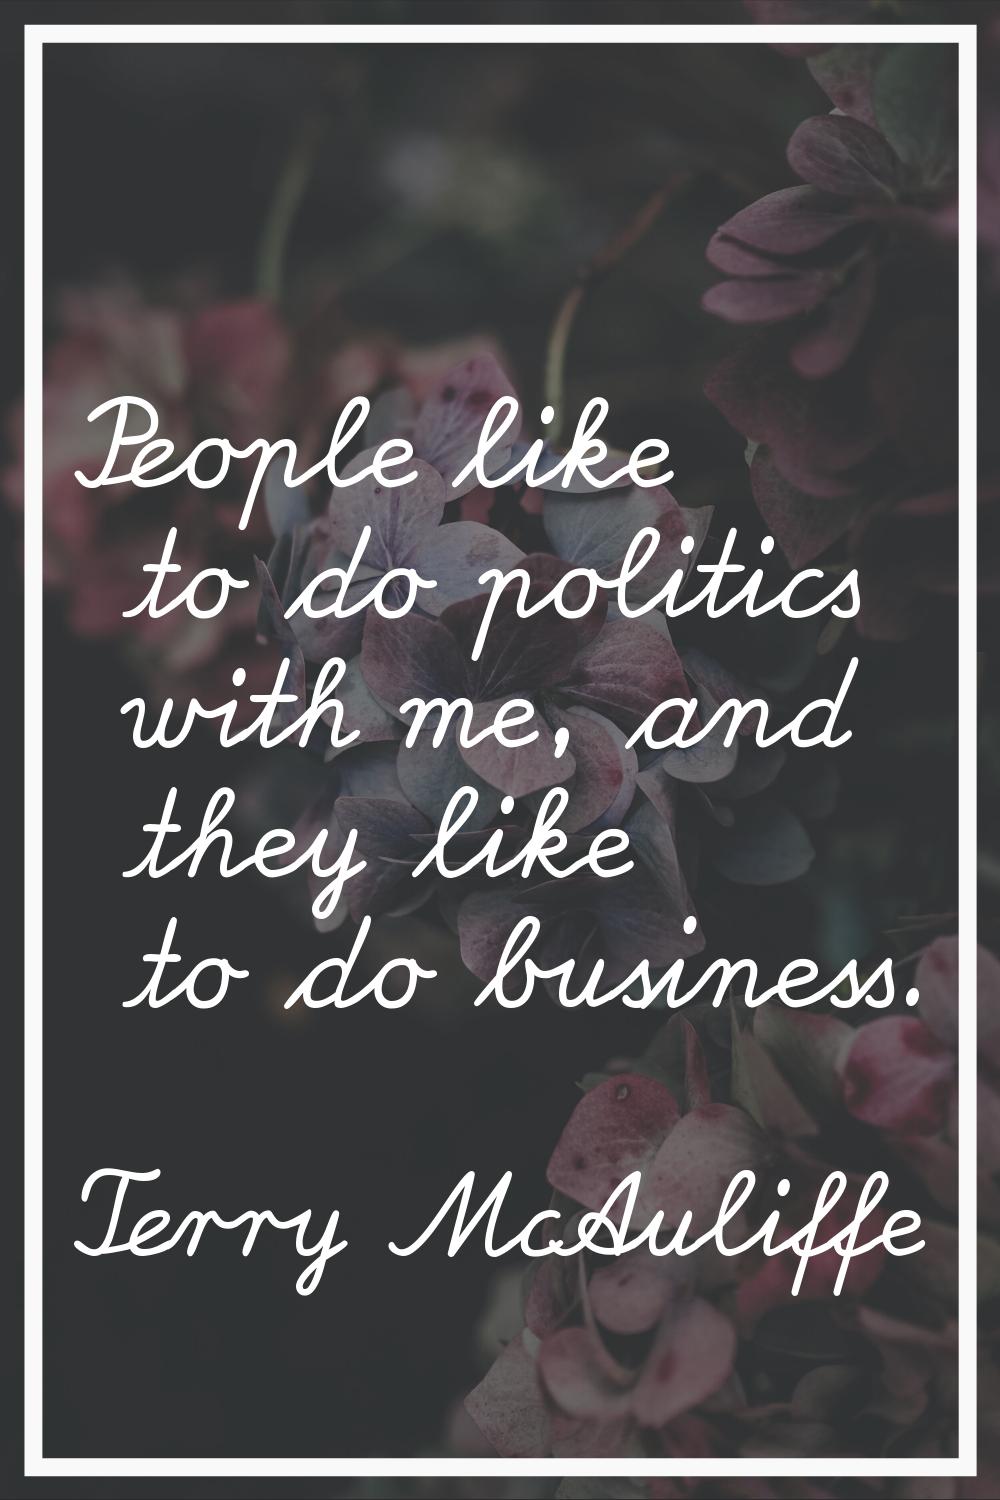 People like to do politics with me, and they like to do business.